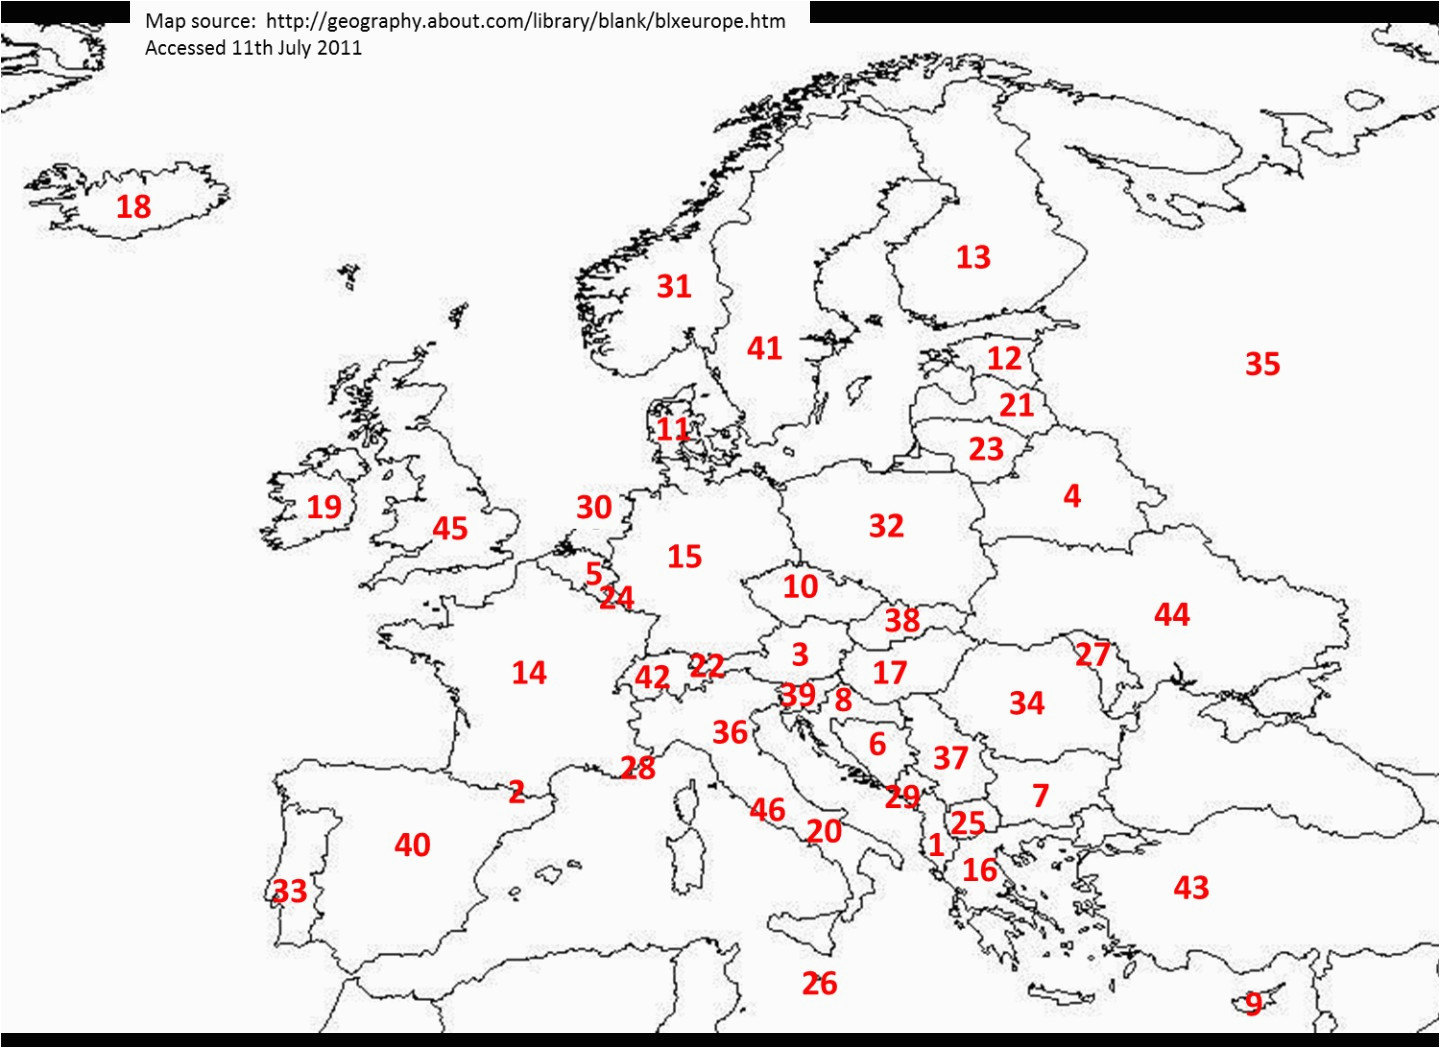 Fill In Map Of Europe Blank Europe Map Climatejourney org